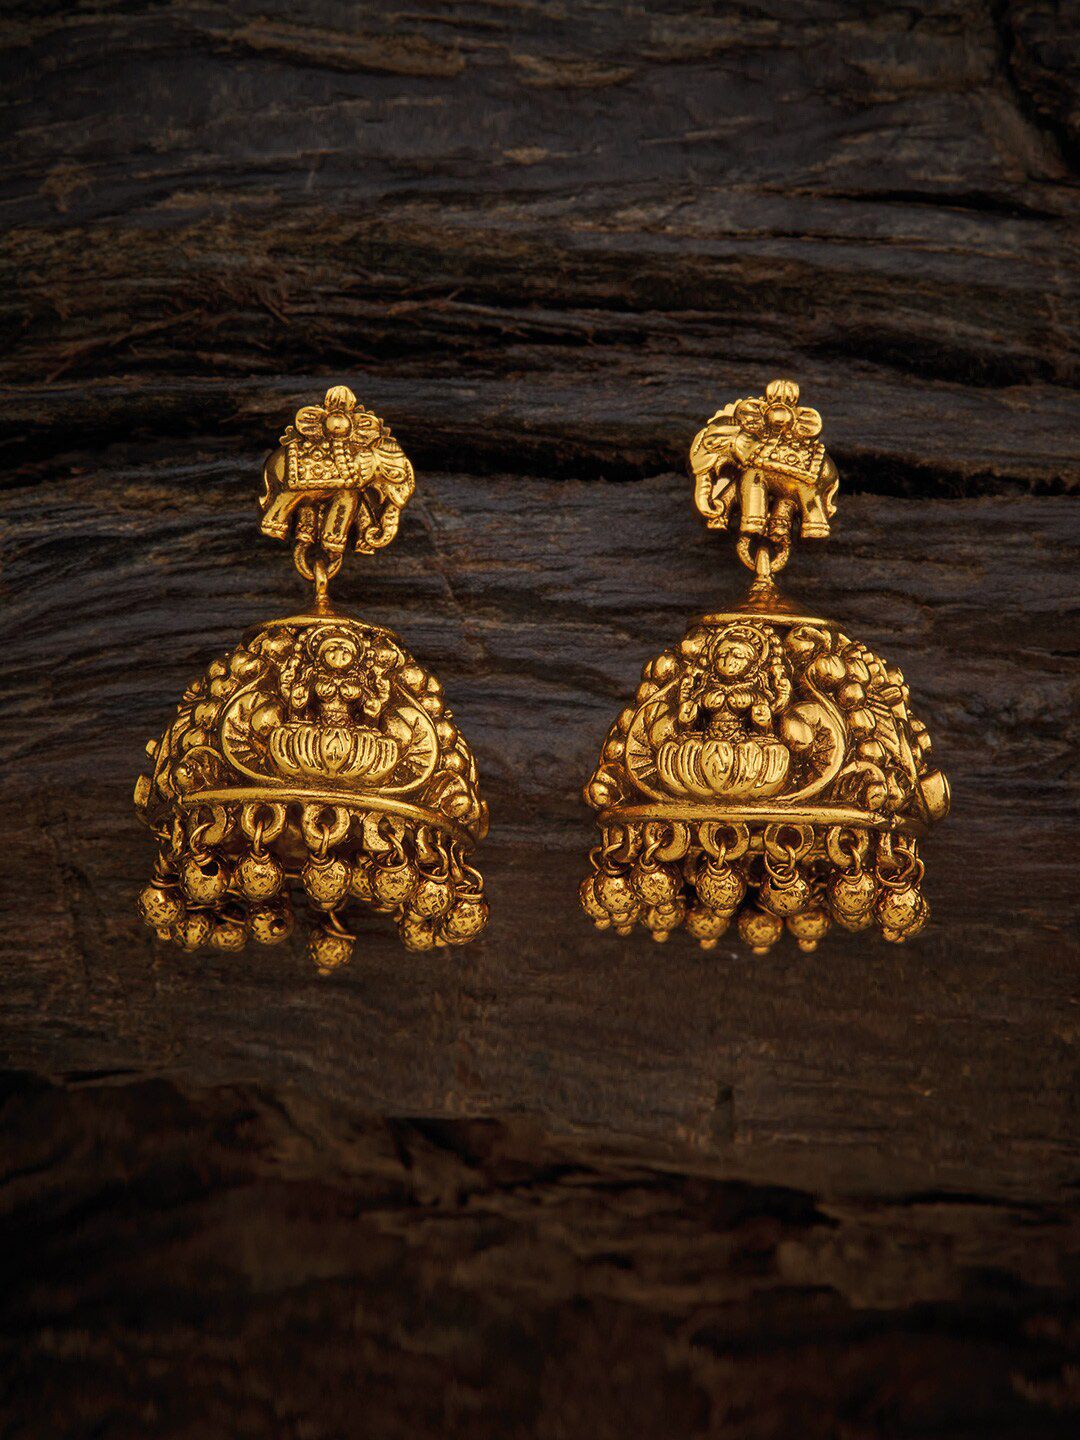 Kushal's Fashion Jewellery Gold-Toned Dome Shaped Jhumkas Earrings Price in India